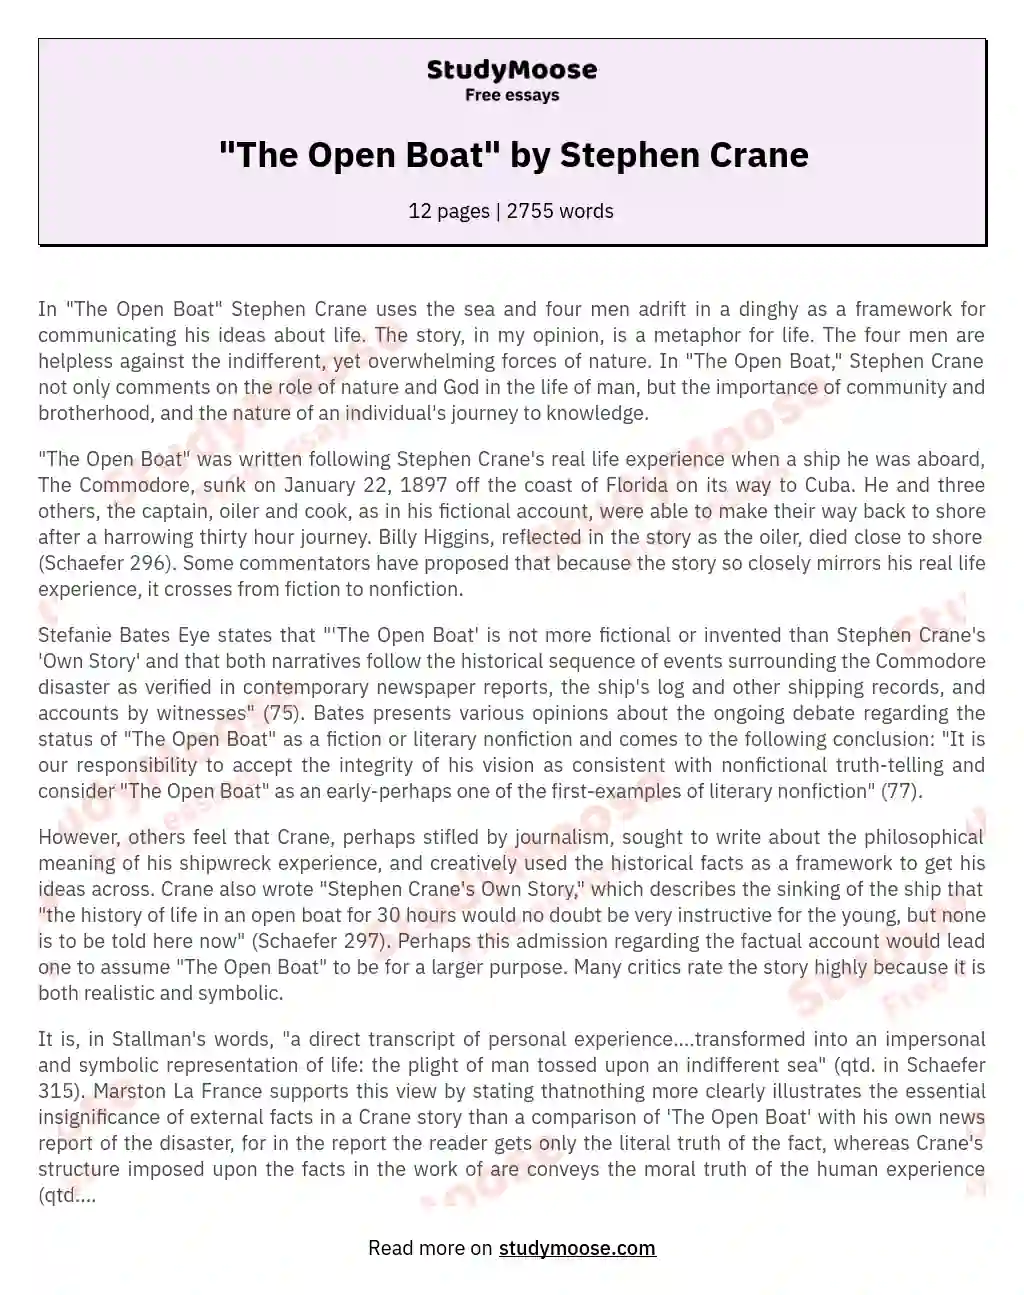 "The Open Boat" by Stephen Crane